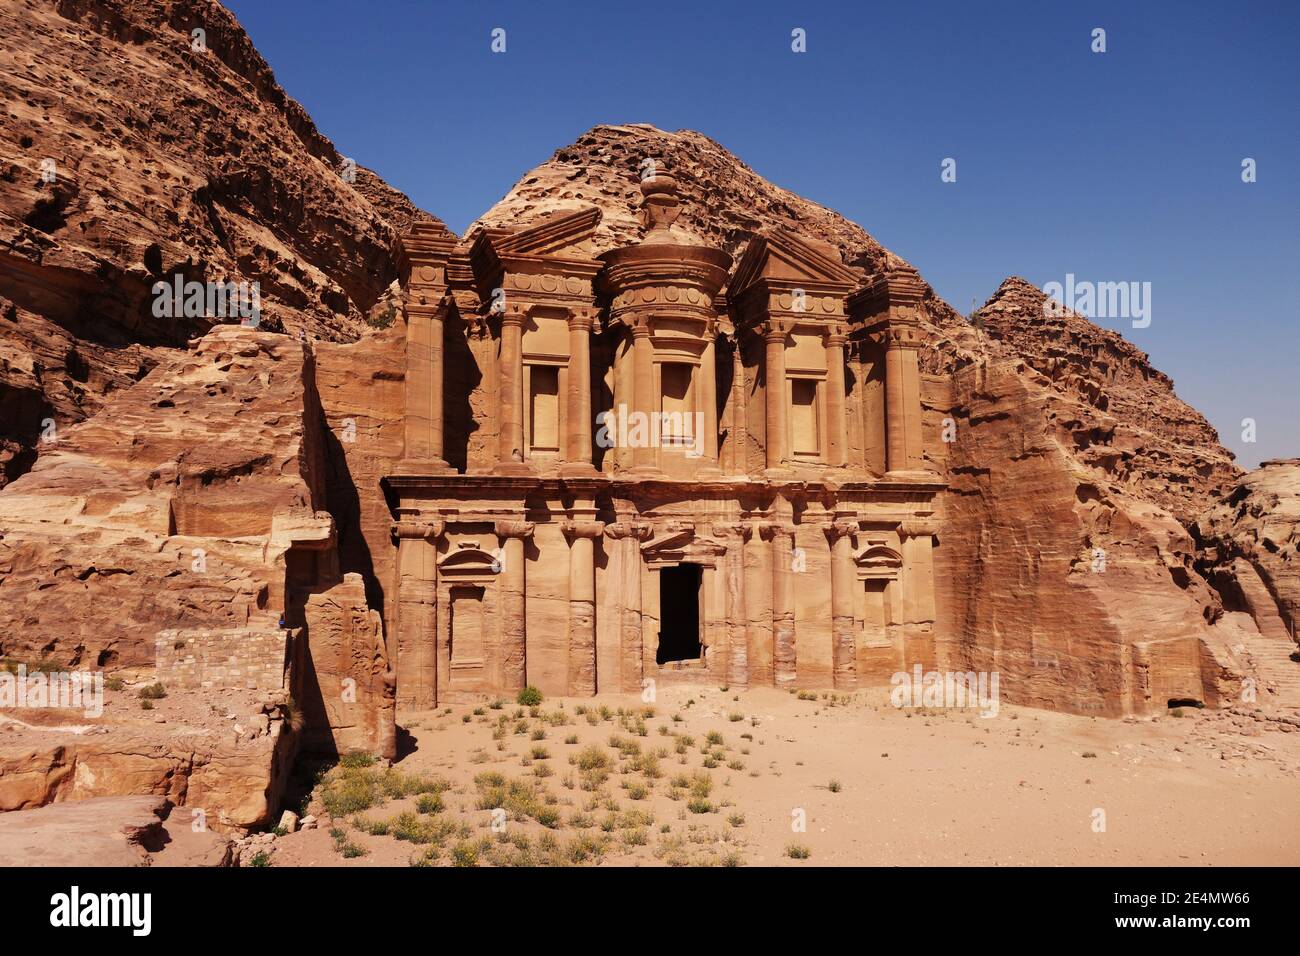 Stunning shot of the huge carved facade in the Nabataean city Stock Photo